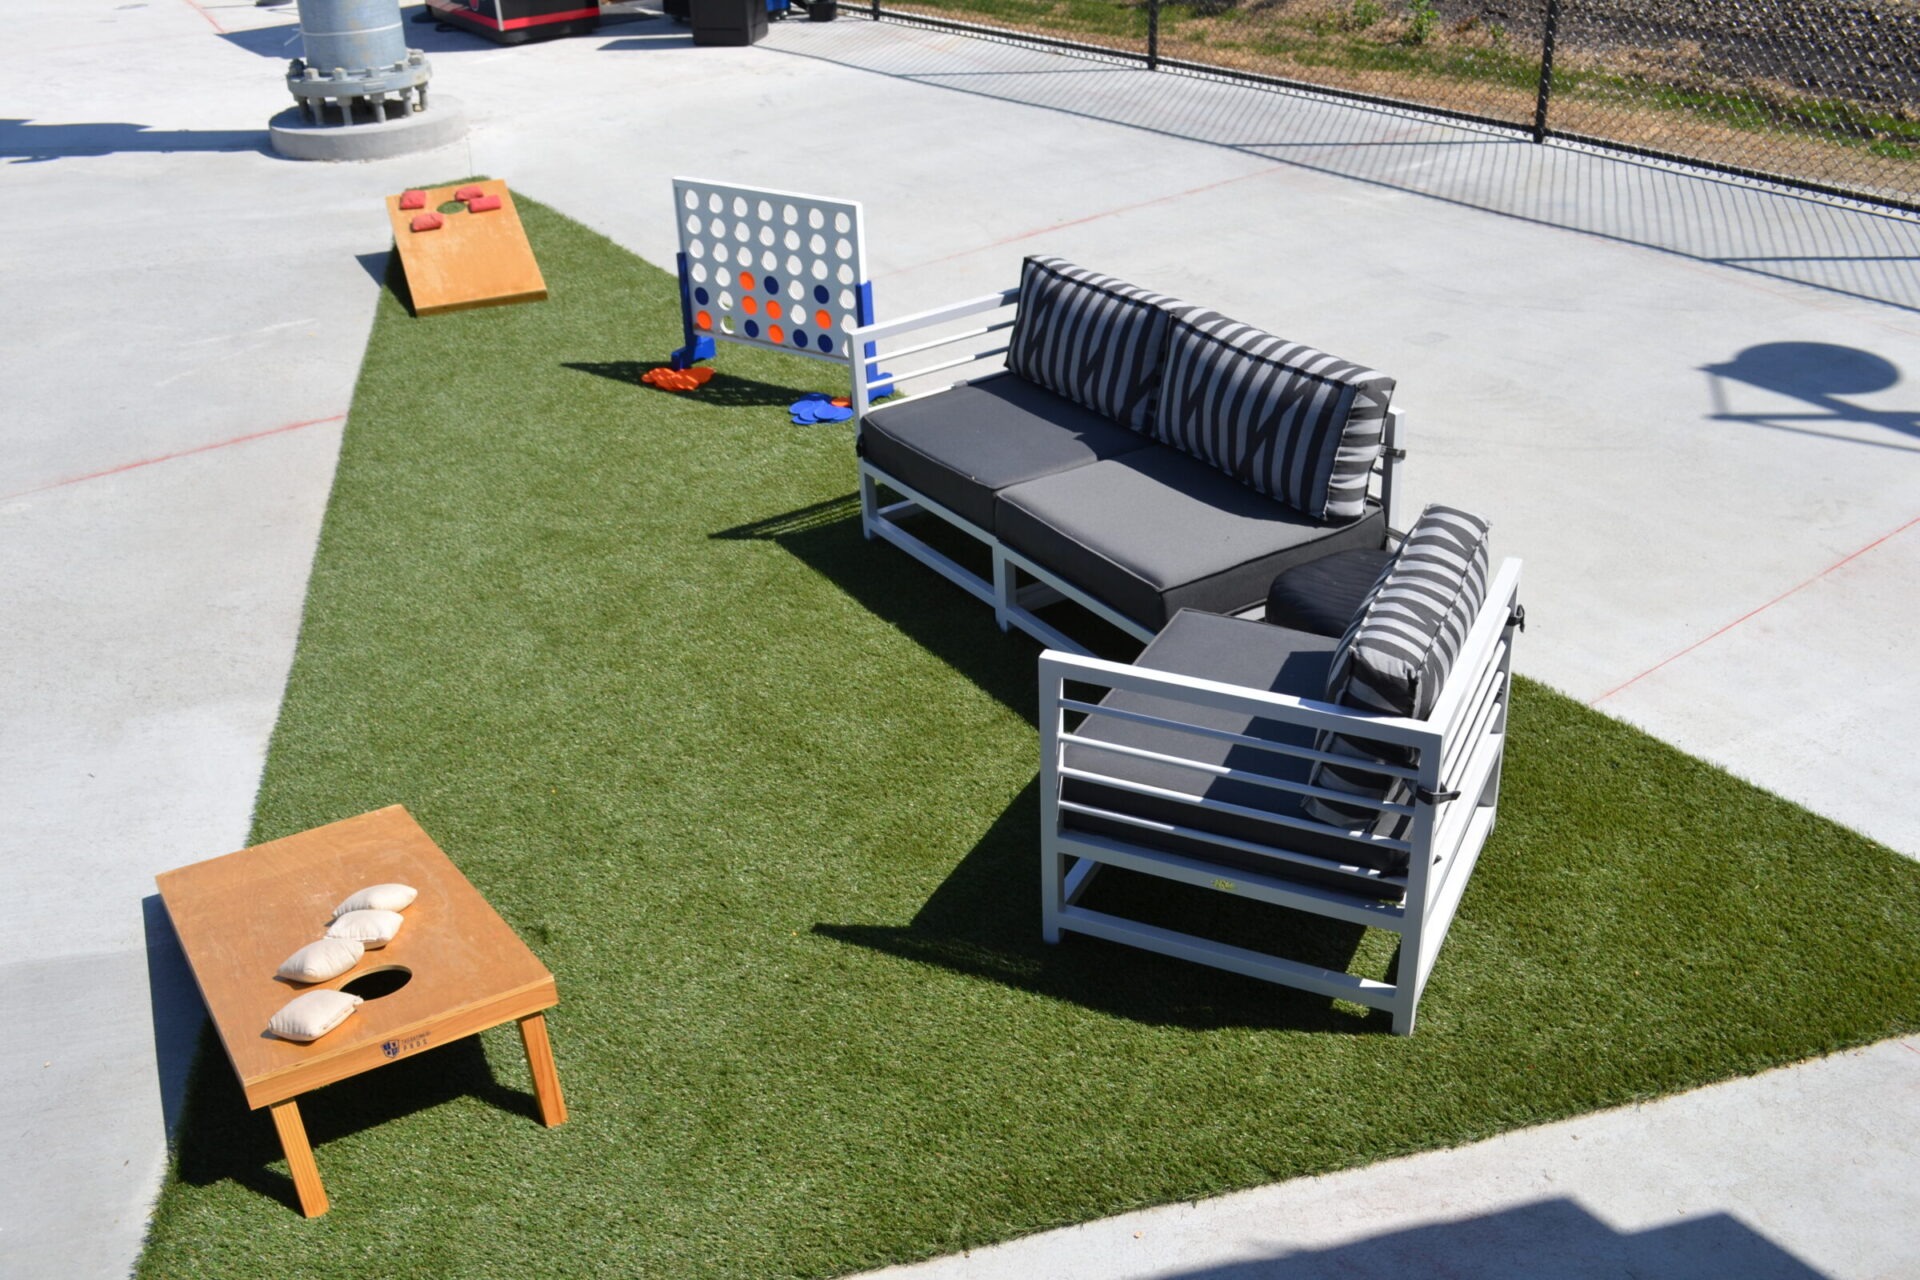 An outdoor recreational area with artificial turf, featuring games like cornhole and Connect Four, a lounge set with striped pillows, and a small wooden table.